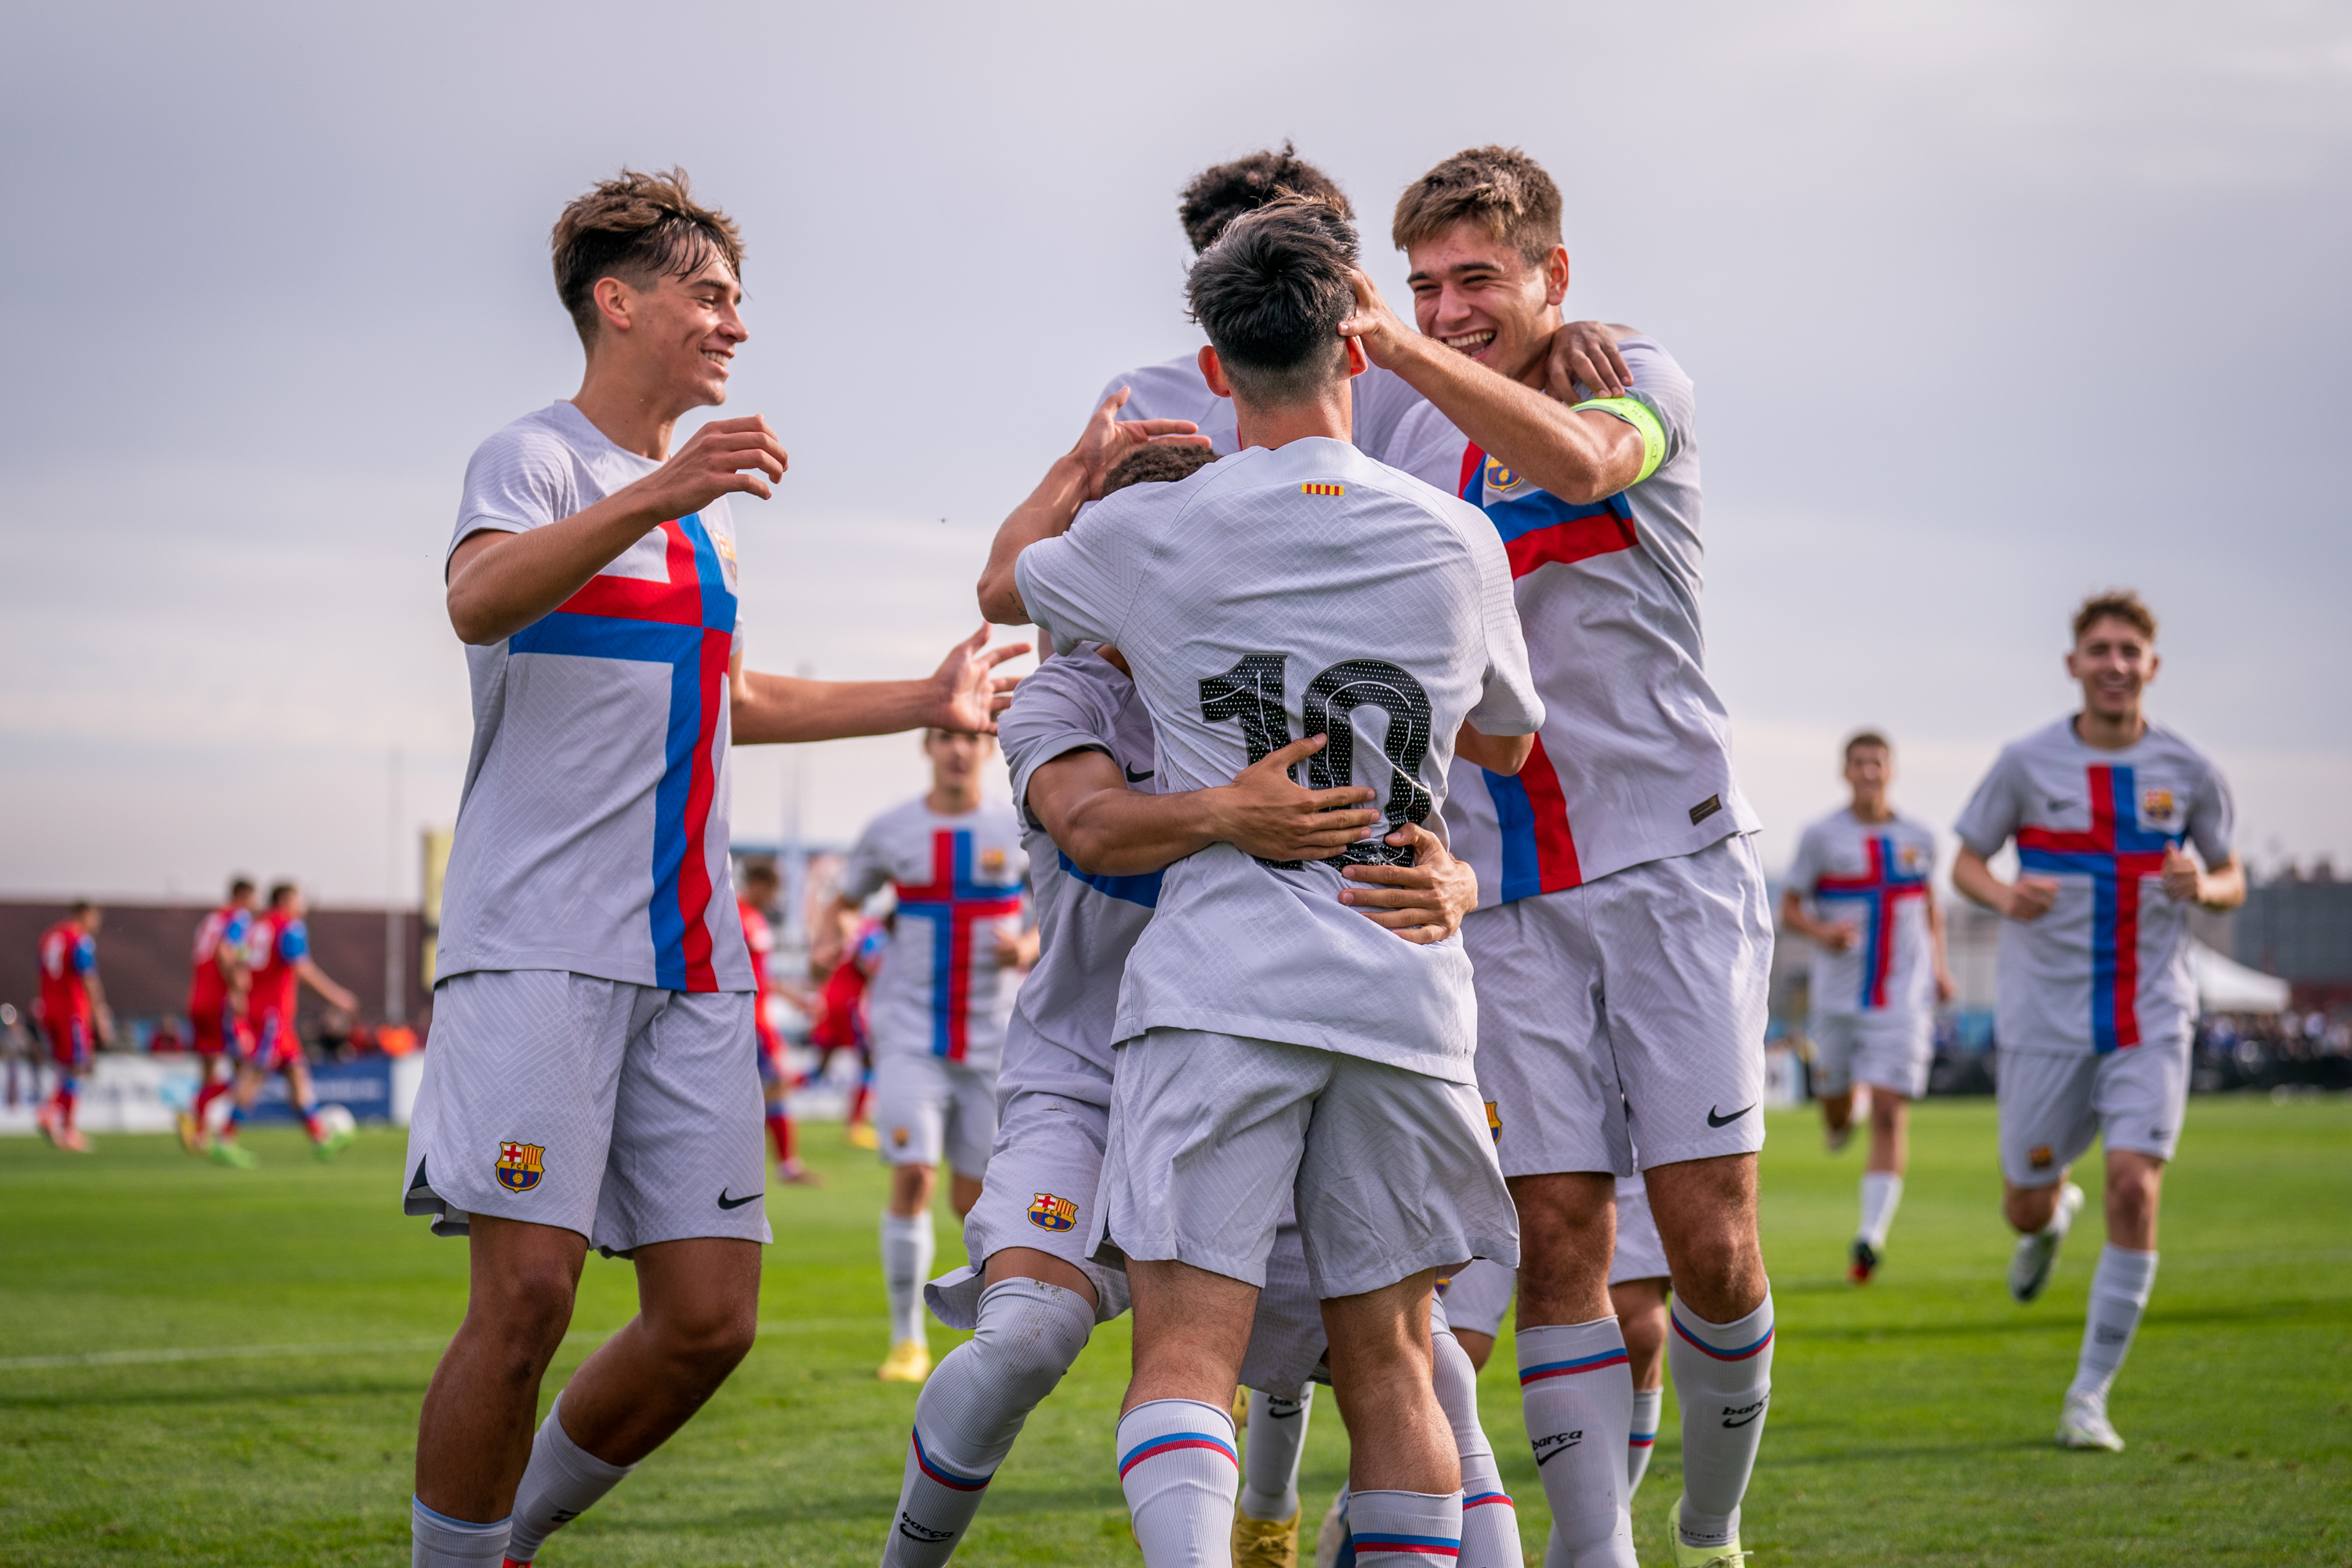 Viktoria Plzen 1-1 Barça Under 19A Draw to conclude the group stage